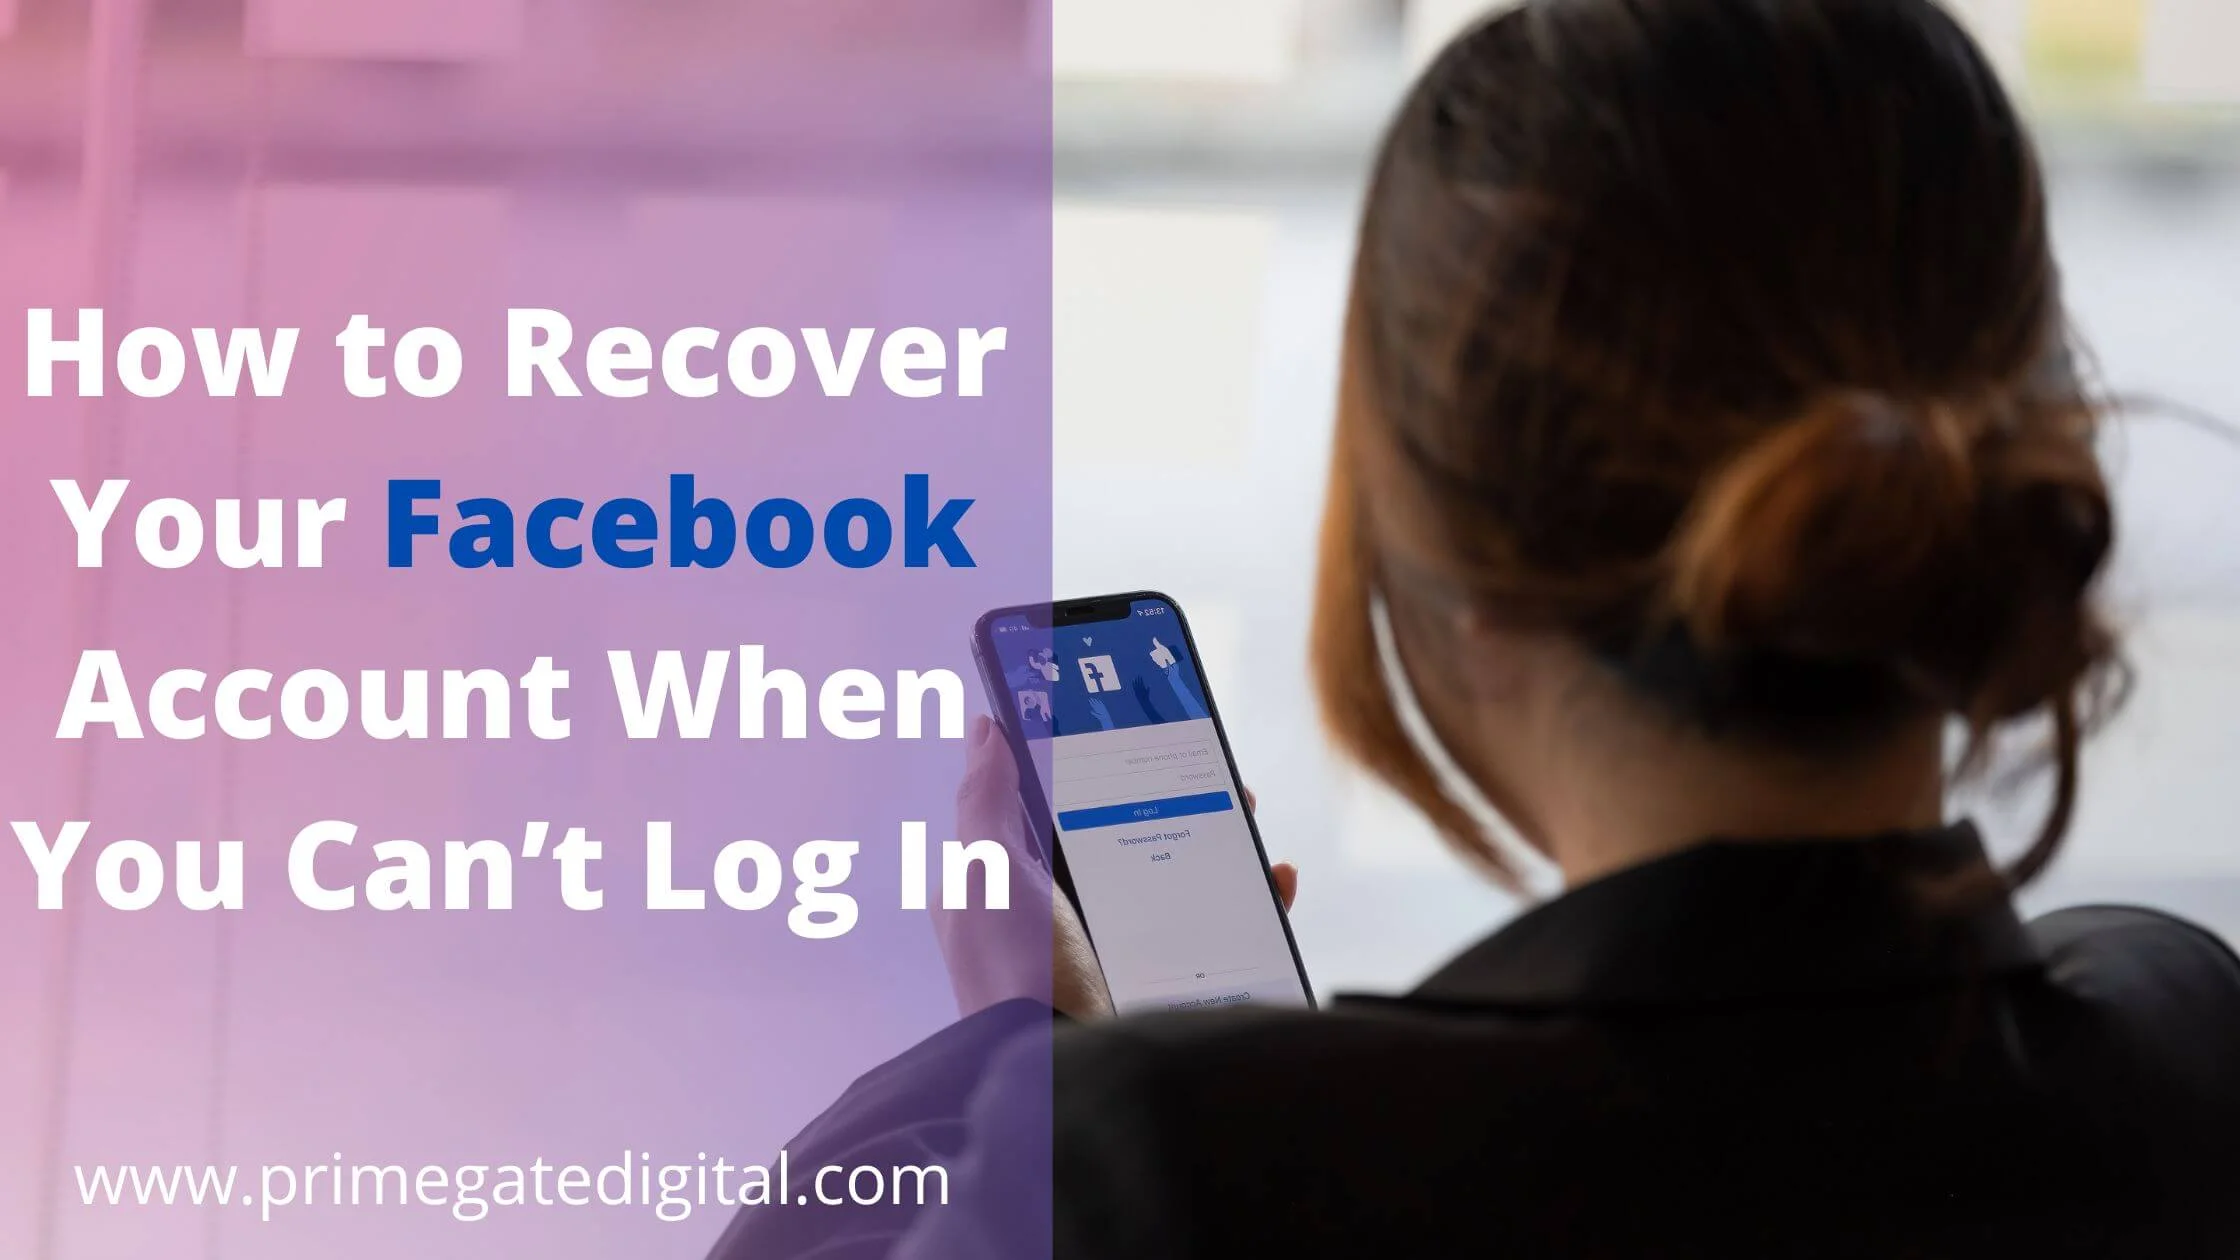 Recover Your Facebook Account When You Can’t Log In